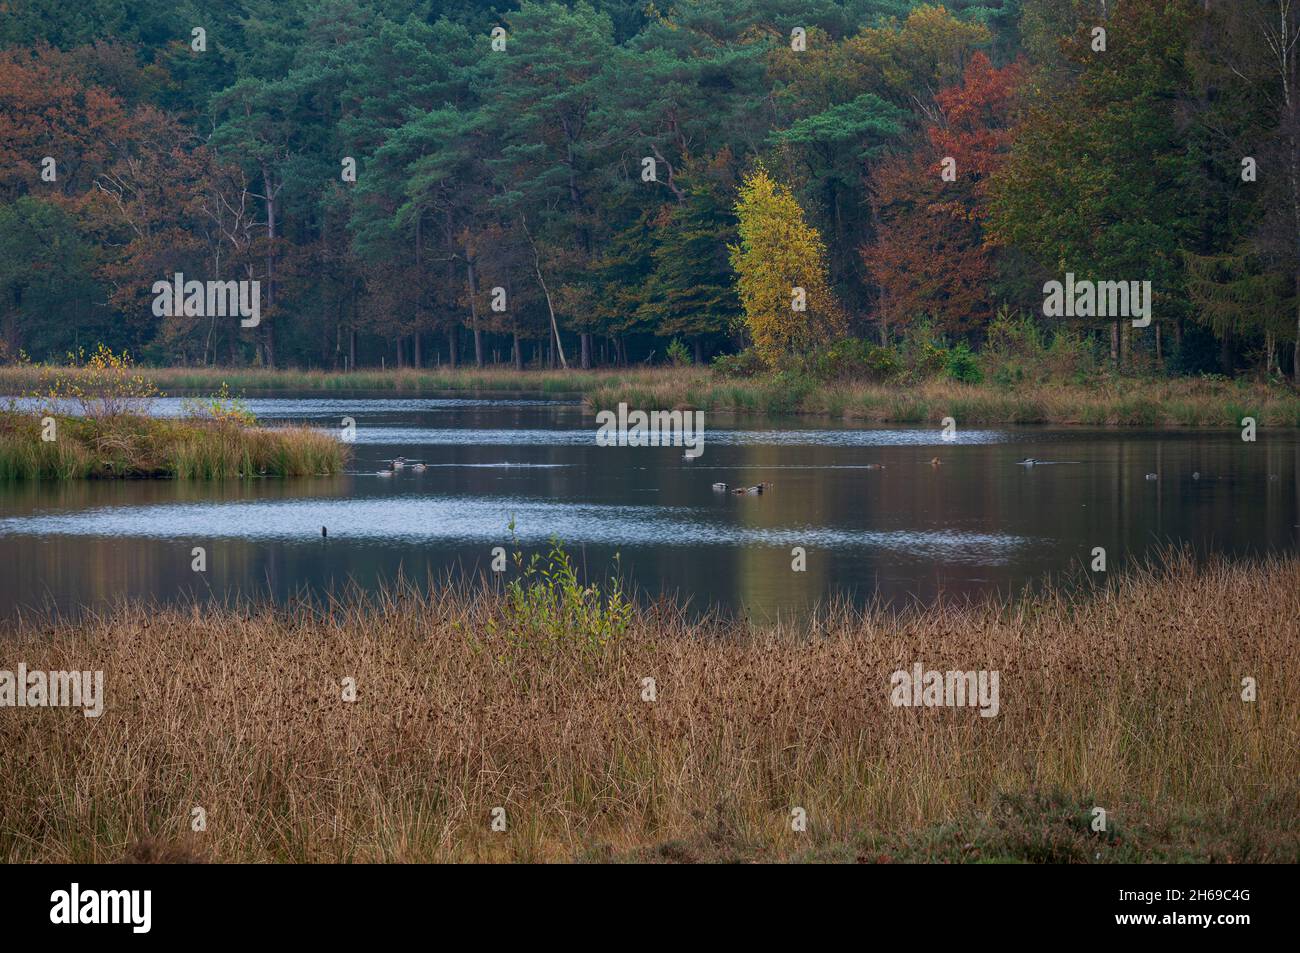 View of the pluismeer during autumn at lage Vuursche The Netherlands, stock photo,  Utrechtse Heuvelrug Stock Photo